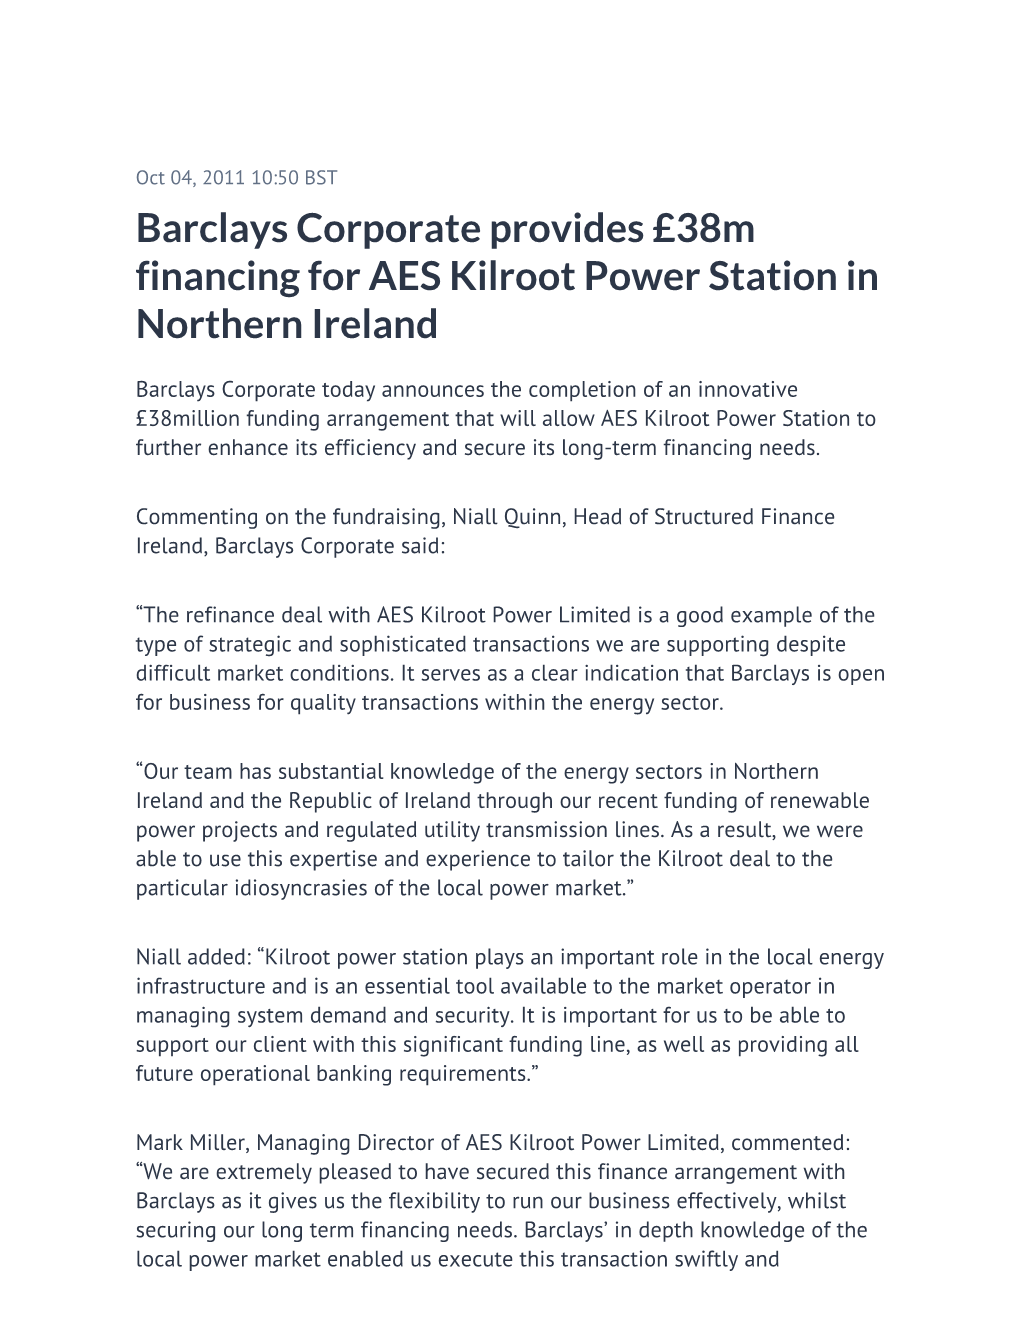 Barclays Corporate Provides £38M Financing for AES Kilroot Power Station in Northern Ireland